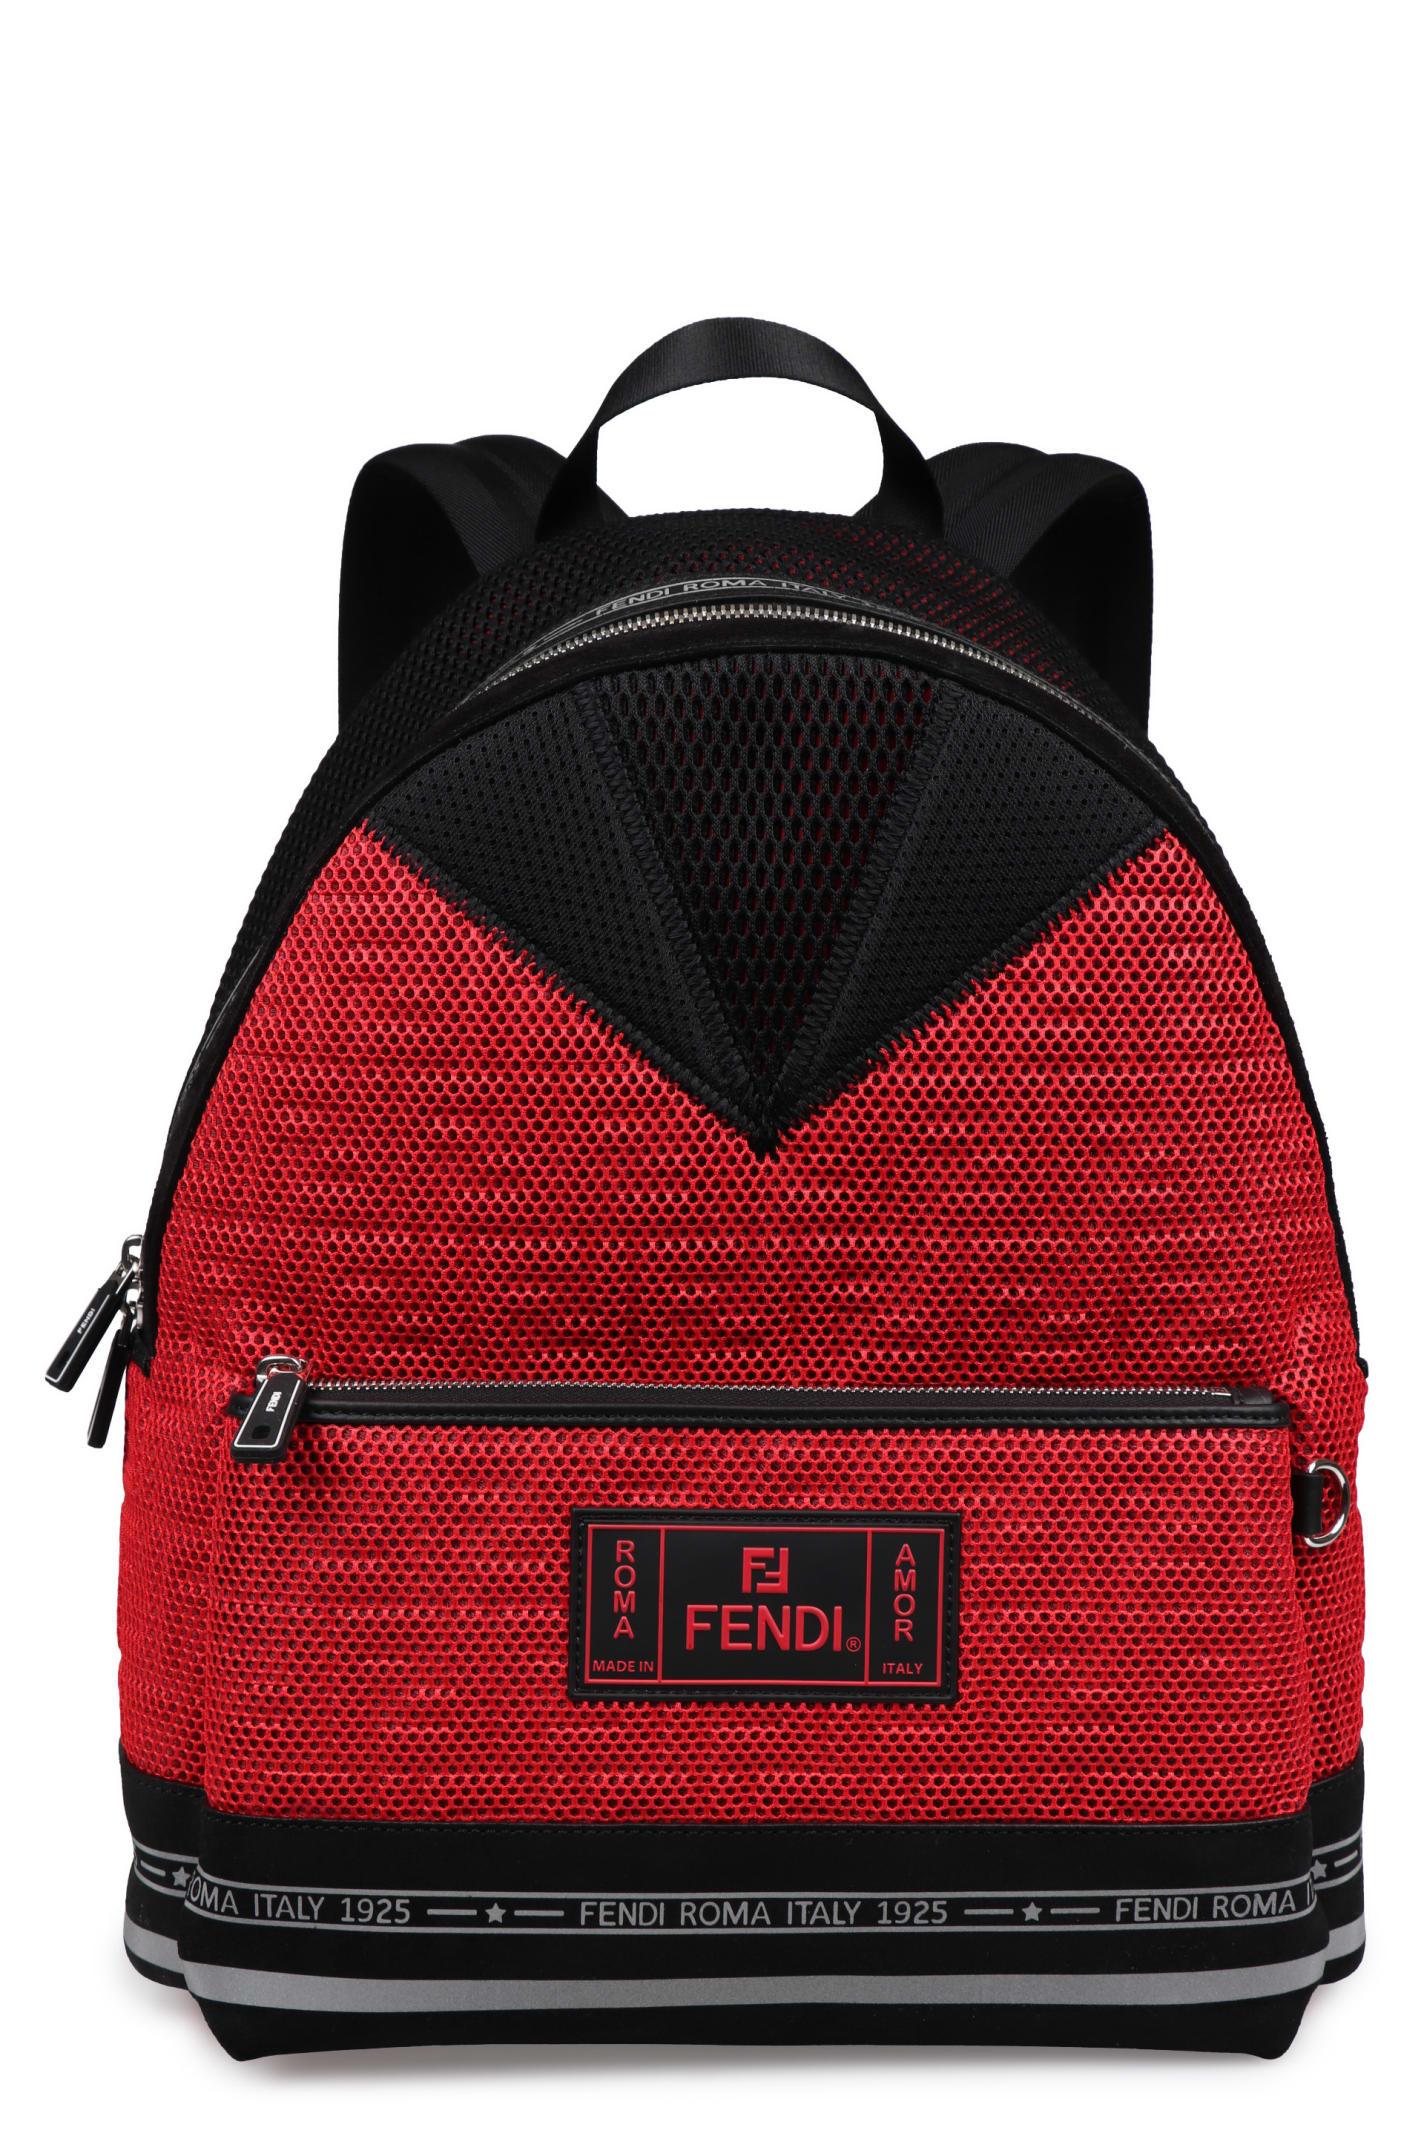 FENDI TECHNICAL FABRIC BACKPACK WITH LOGO,7VZ042A7S8 F08LP